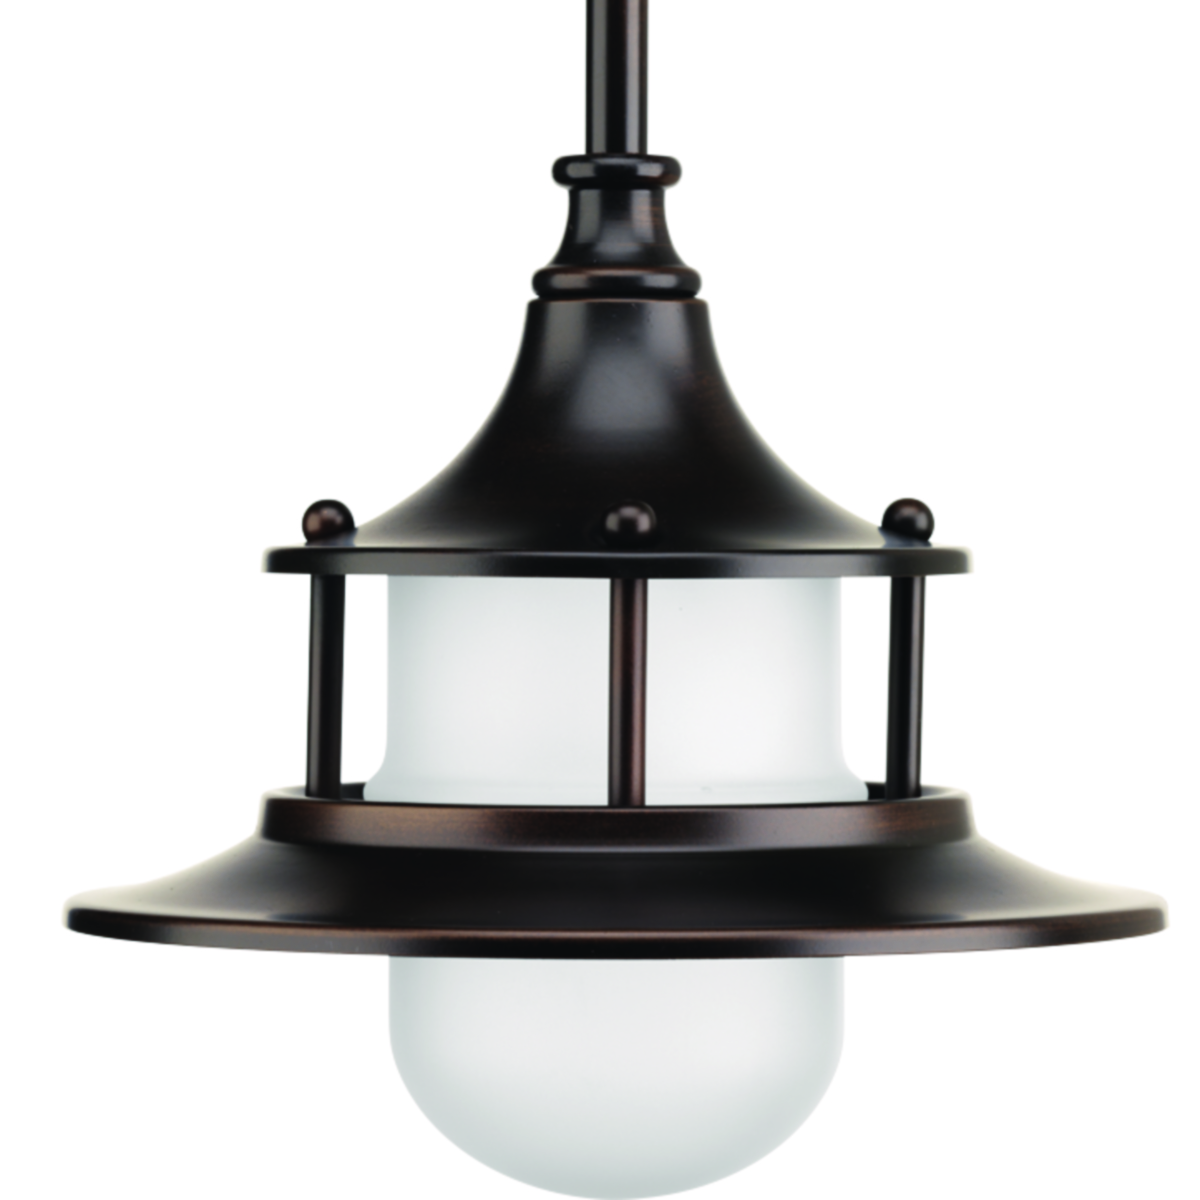 Parlay helps further your love of nautical-inspired fashion into your decor. The tiered shade supports etched glass to offer illumination and task lighting where it's needed. 9w LED source offers energy efficiency, long life and aesthetic benefits to interior spaces. This one-light stem hung mini-pendant is in an Antique Bronze finish.